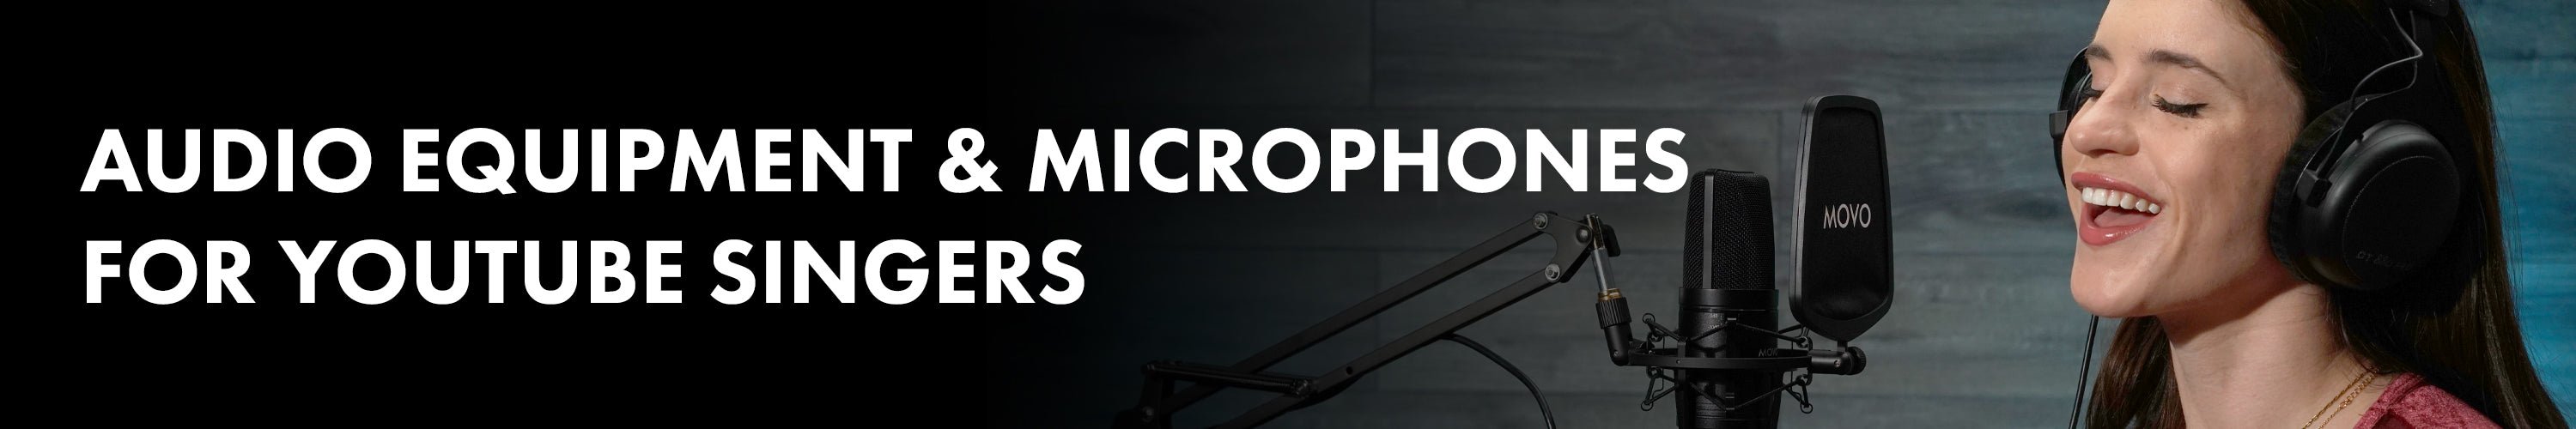 Audio Equipment & Microphones for YouTube Singers - Movo